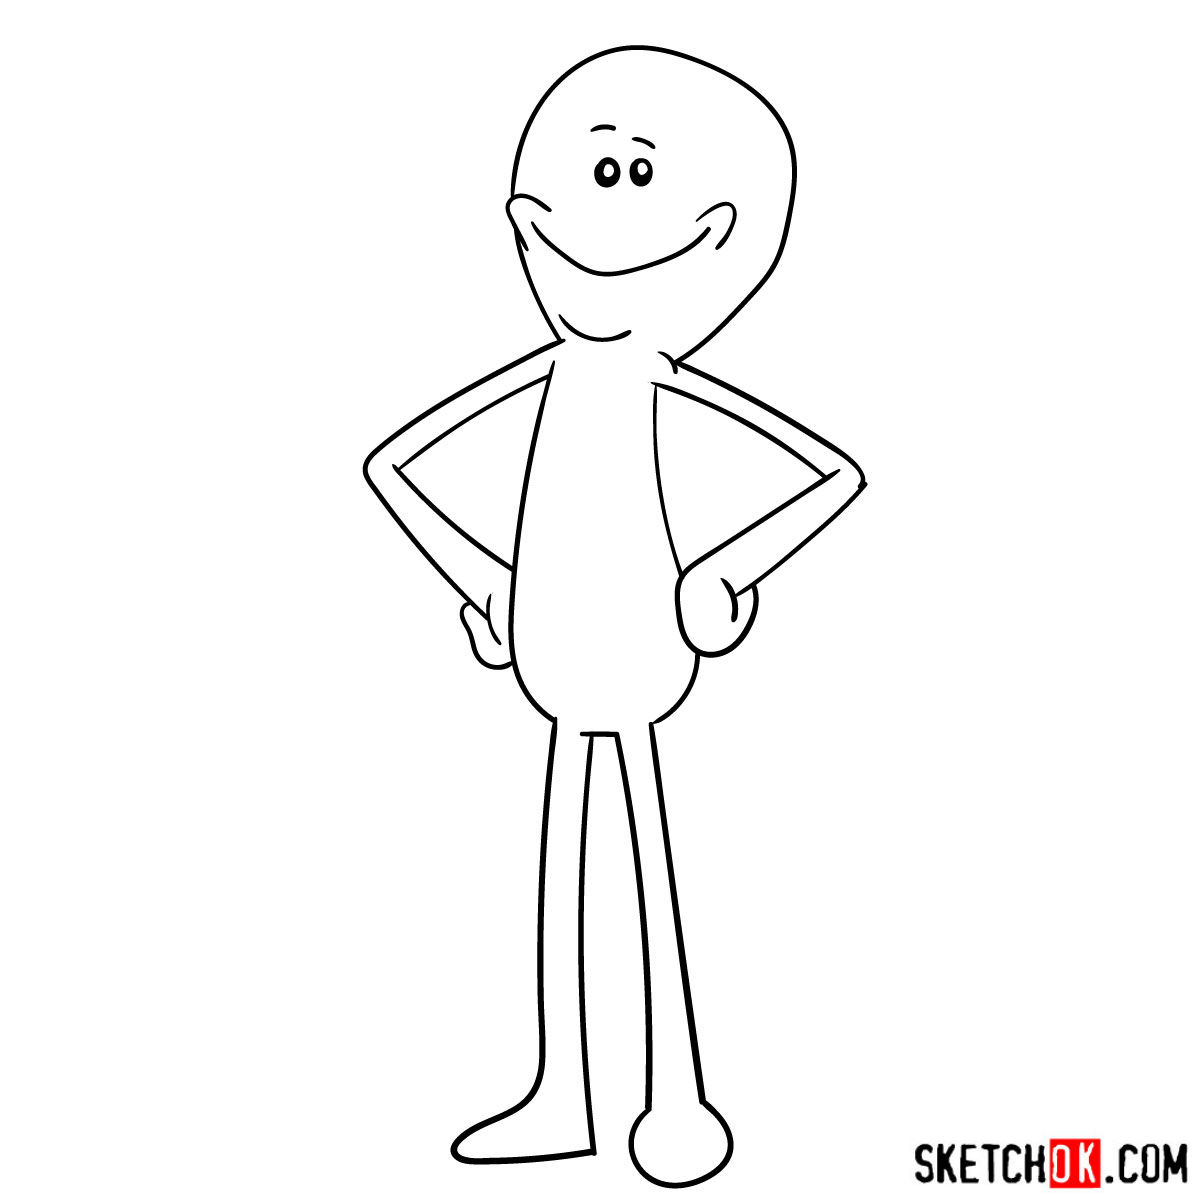 How to draw Mr. Meeseeks - Sketchok easy drawing guides. source: sketchok.c...